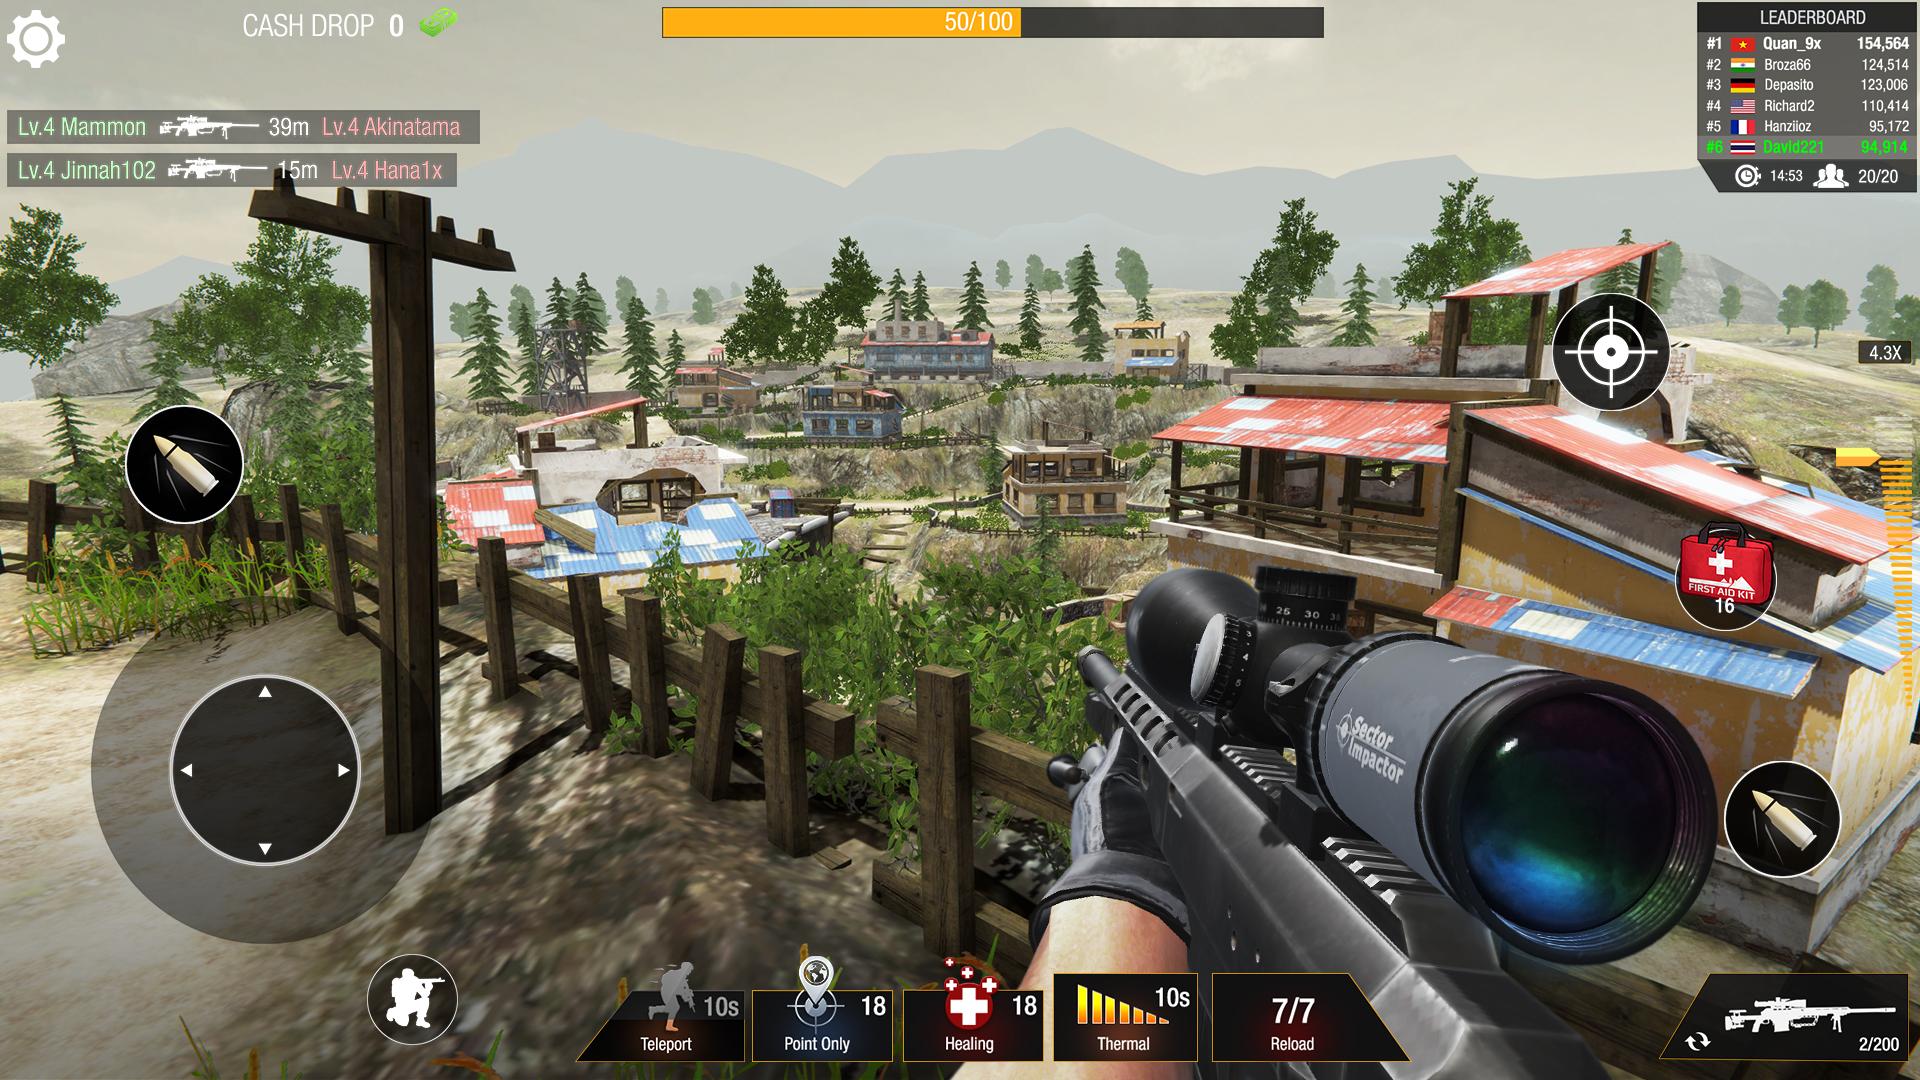 Sniper Games: Bullet Strike - Free Shooting Game for Android ... - 